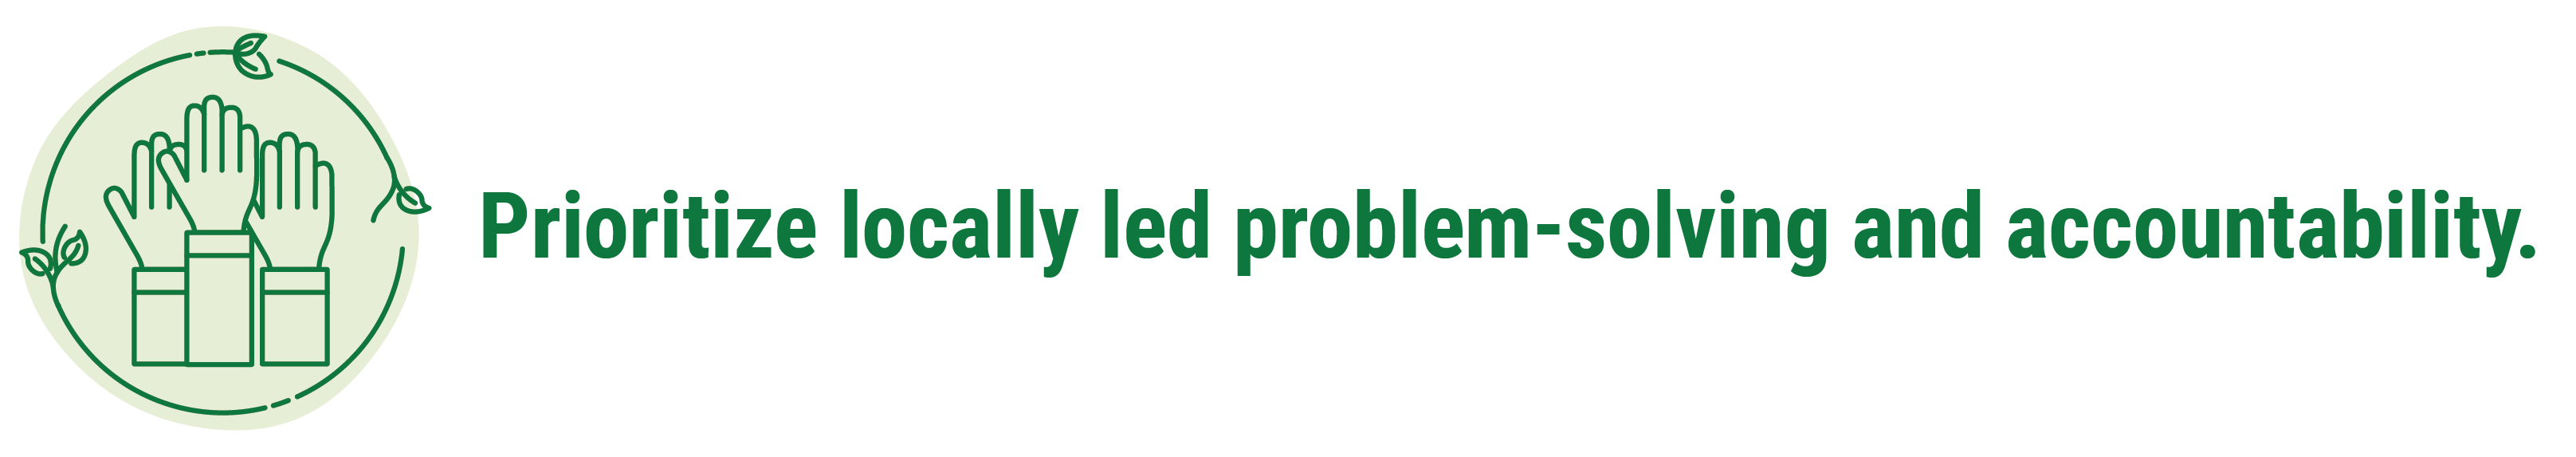 Prioritize locally led problem-solving and accountability